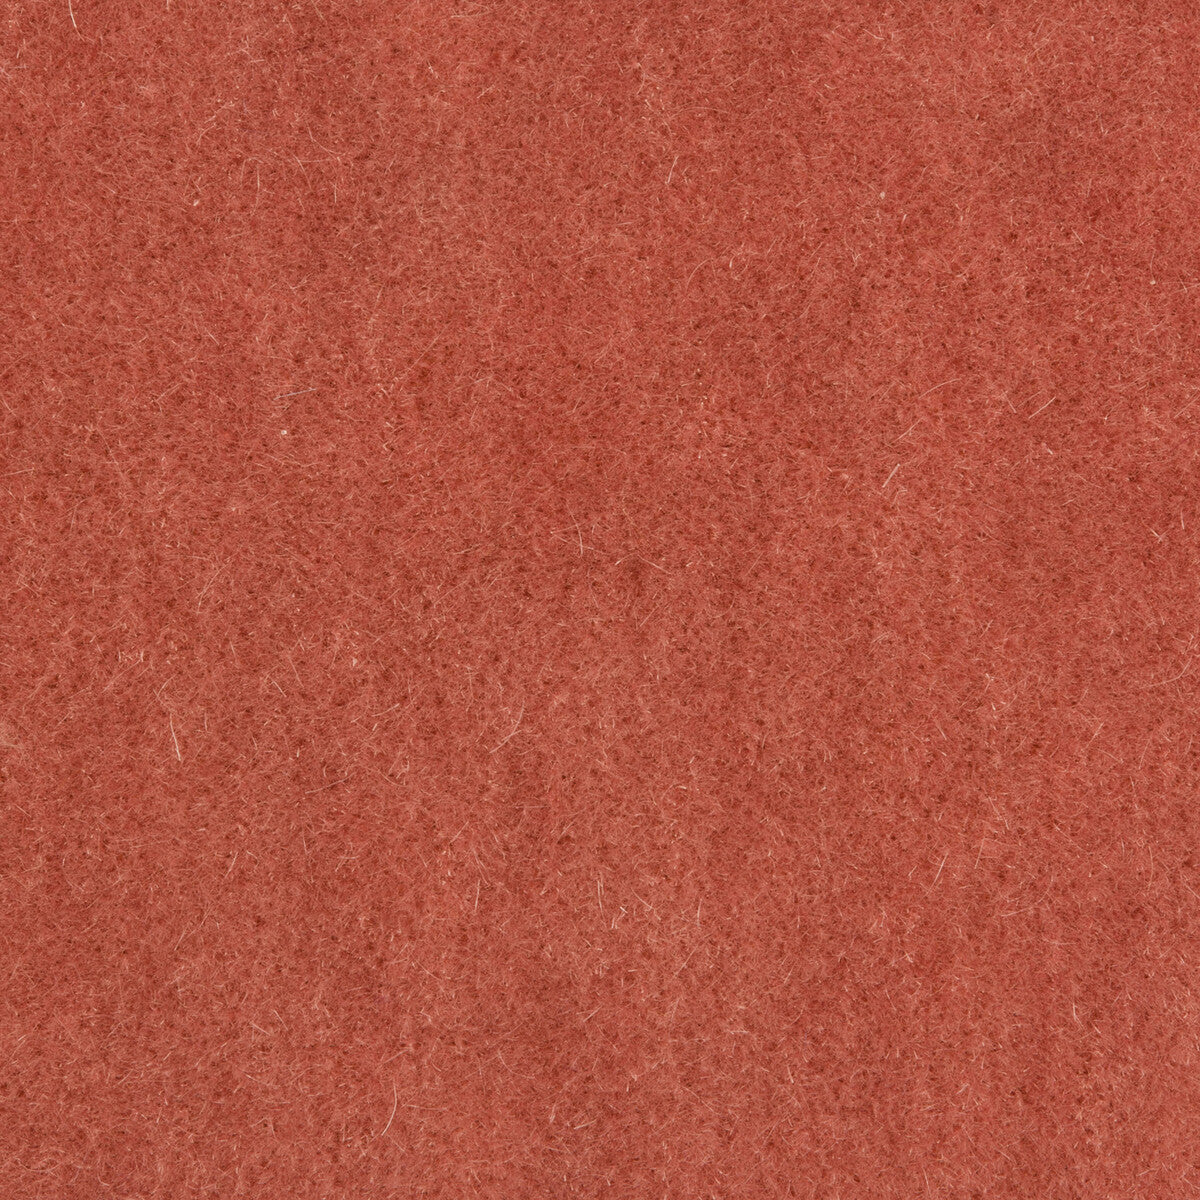 Bachelor Mohair fabric in blush color - pattern 8014101.17.0 - by Brunschwig &amp; Fils